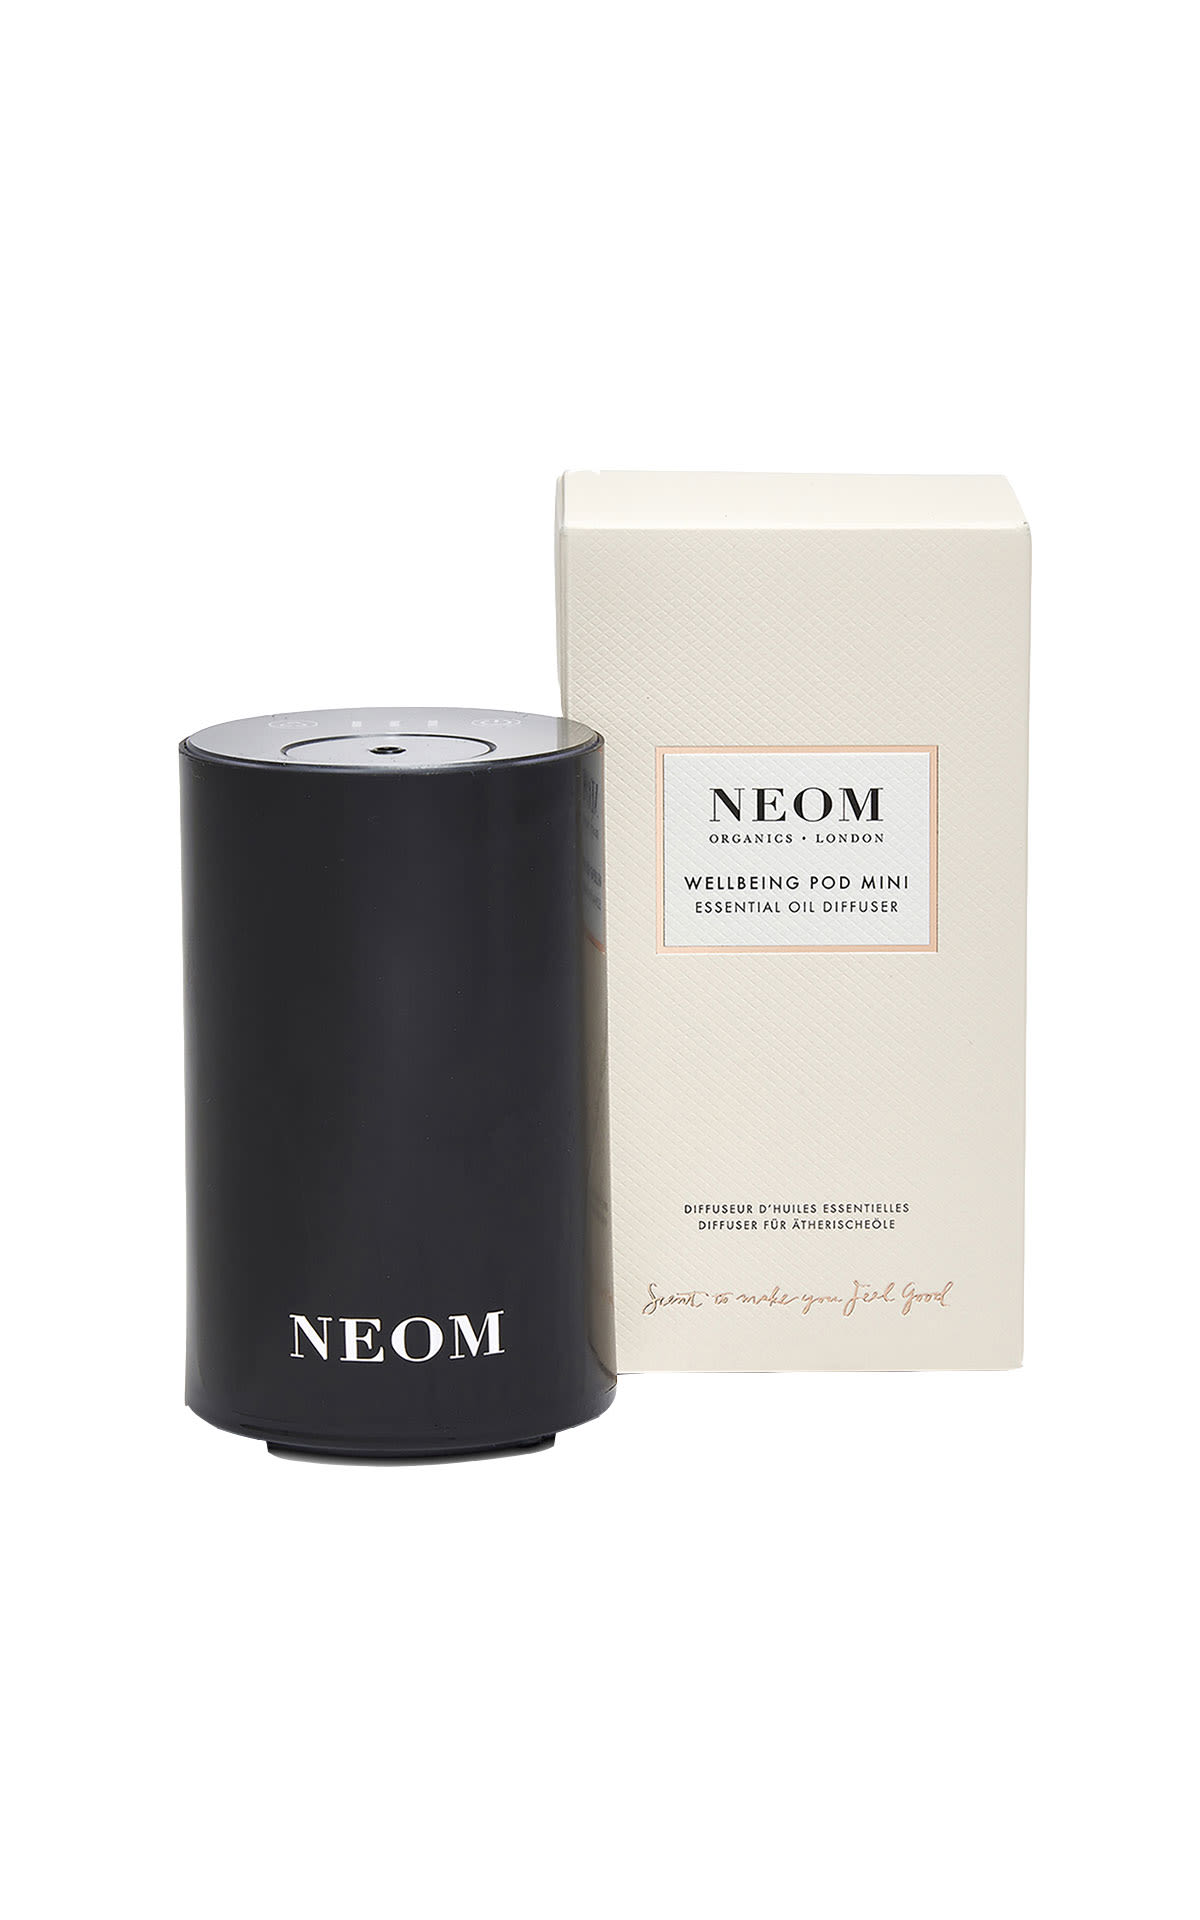 NEOM Wellbeing pod mini from Bicester Village